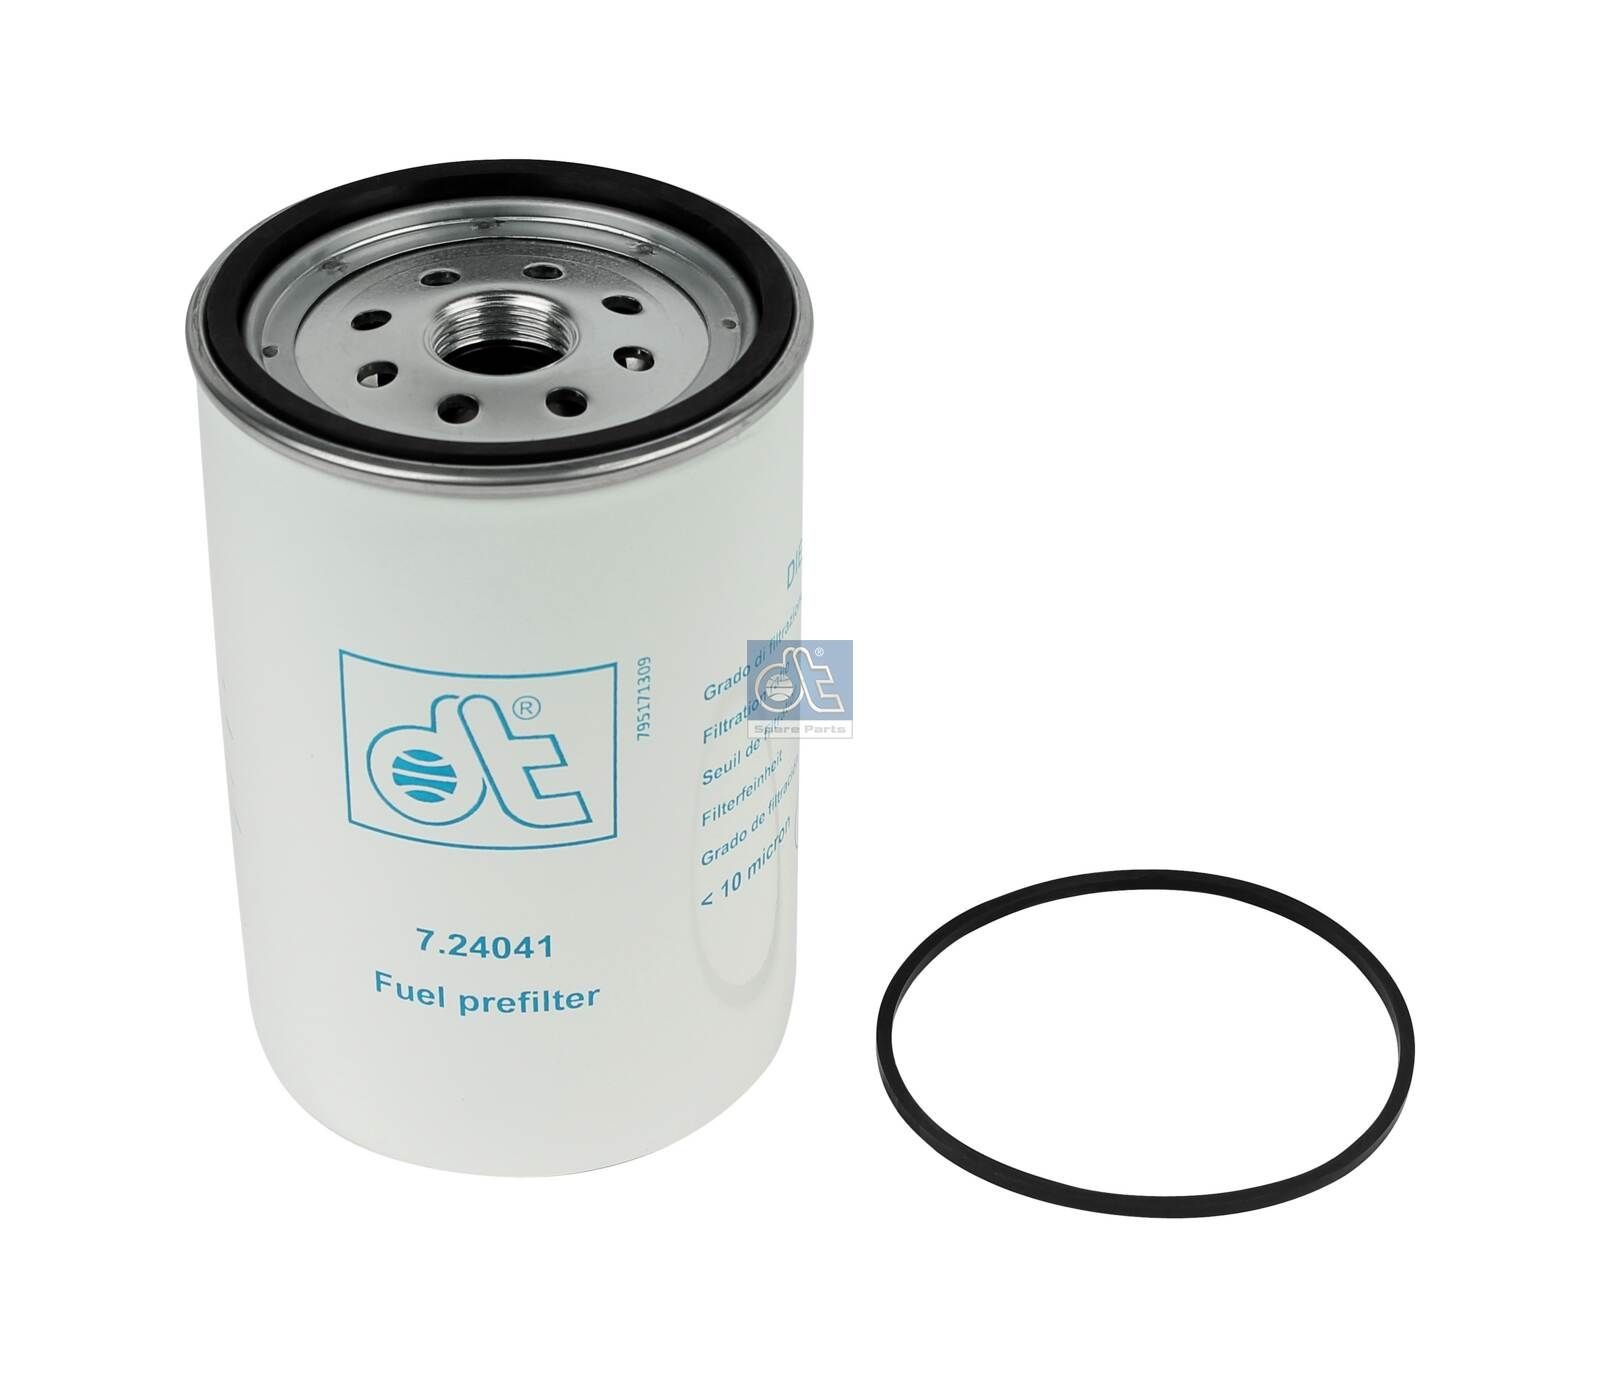 WK 1070 x DT Spare Parts 7.24041 Fuel filter 001 302 279 0